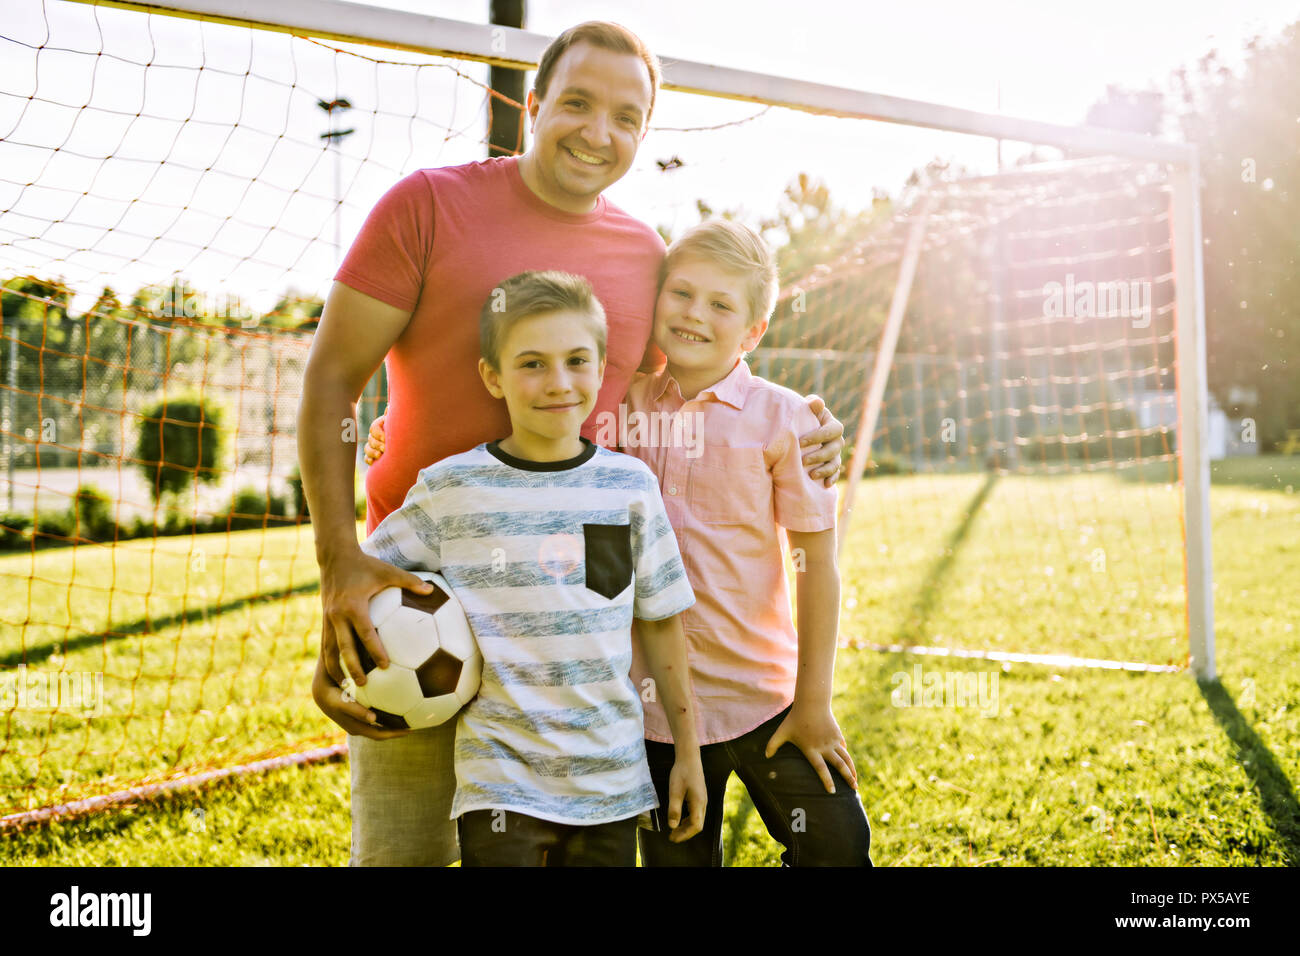 man with child playing football outside on field Stock Photo